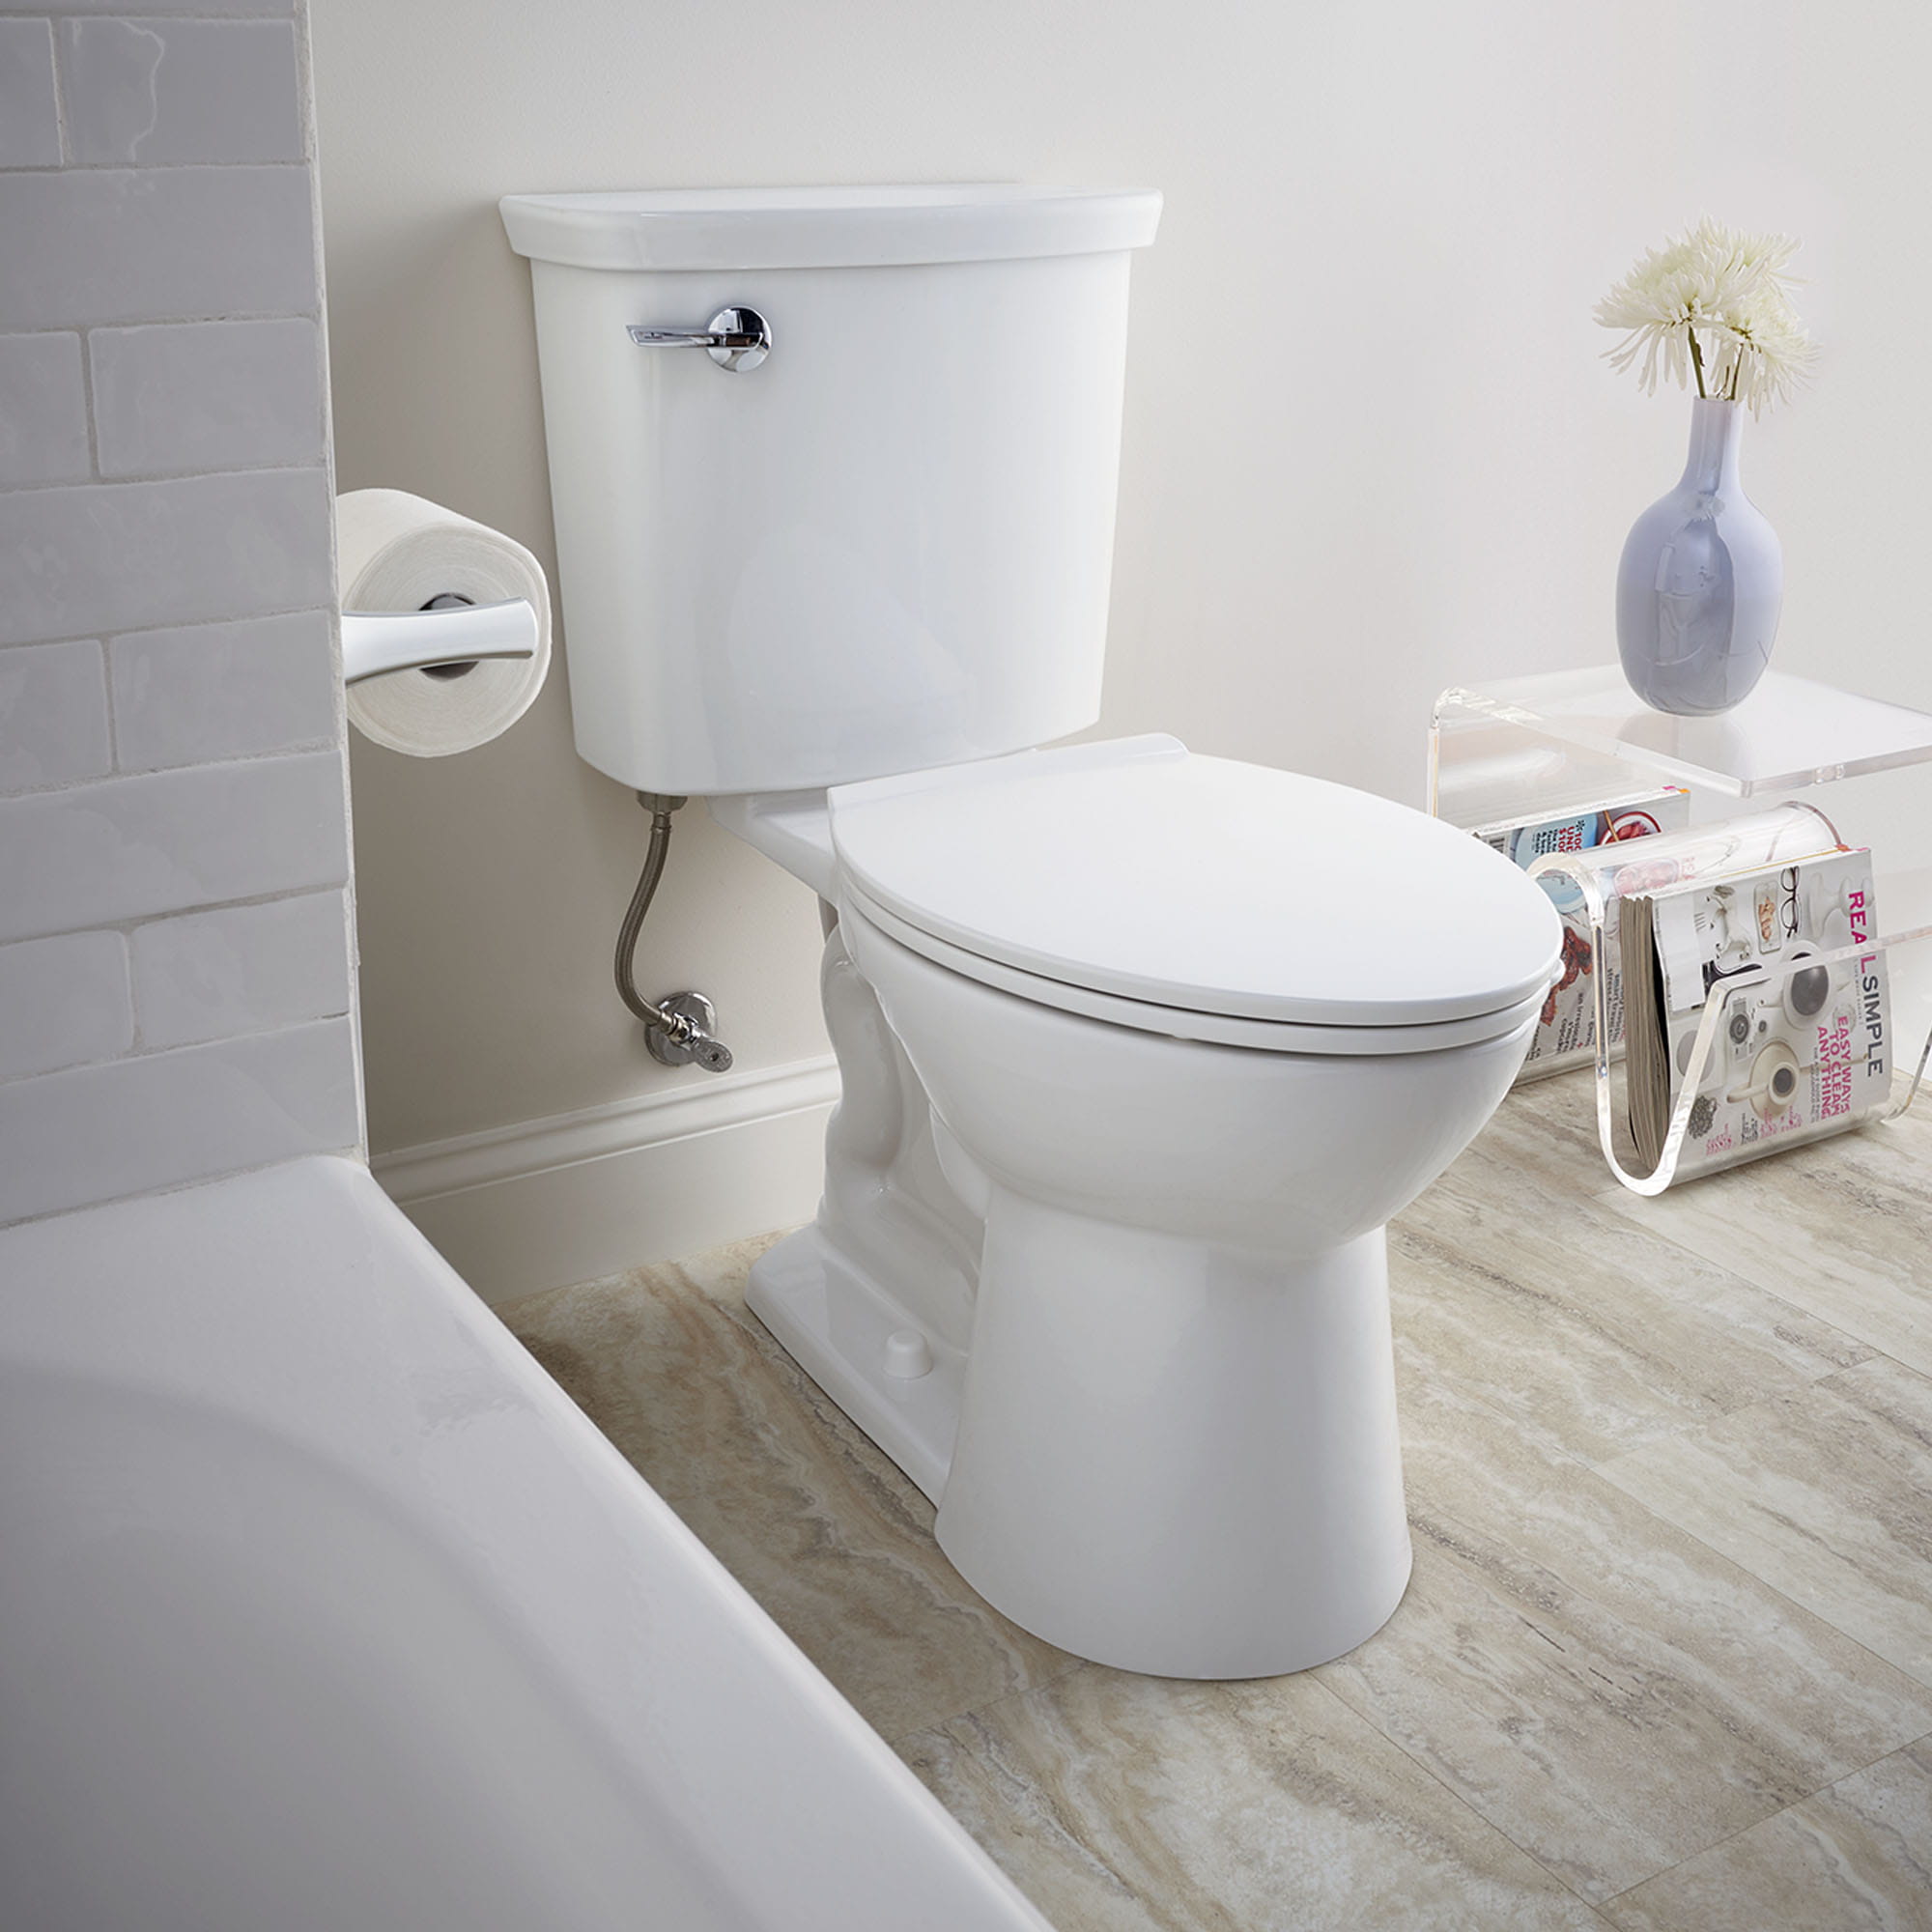 VorMax® Two-Piece 1.0 gpf/3.8 Lpf Chair Height Elongated Toilet Less Seat